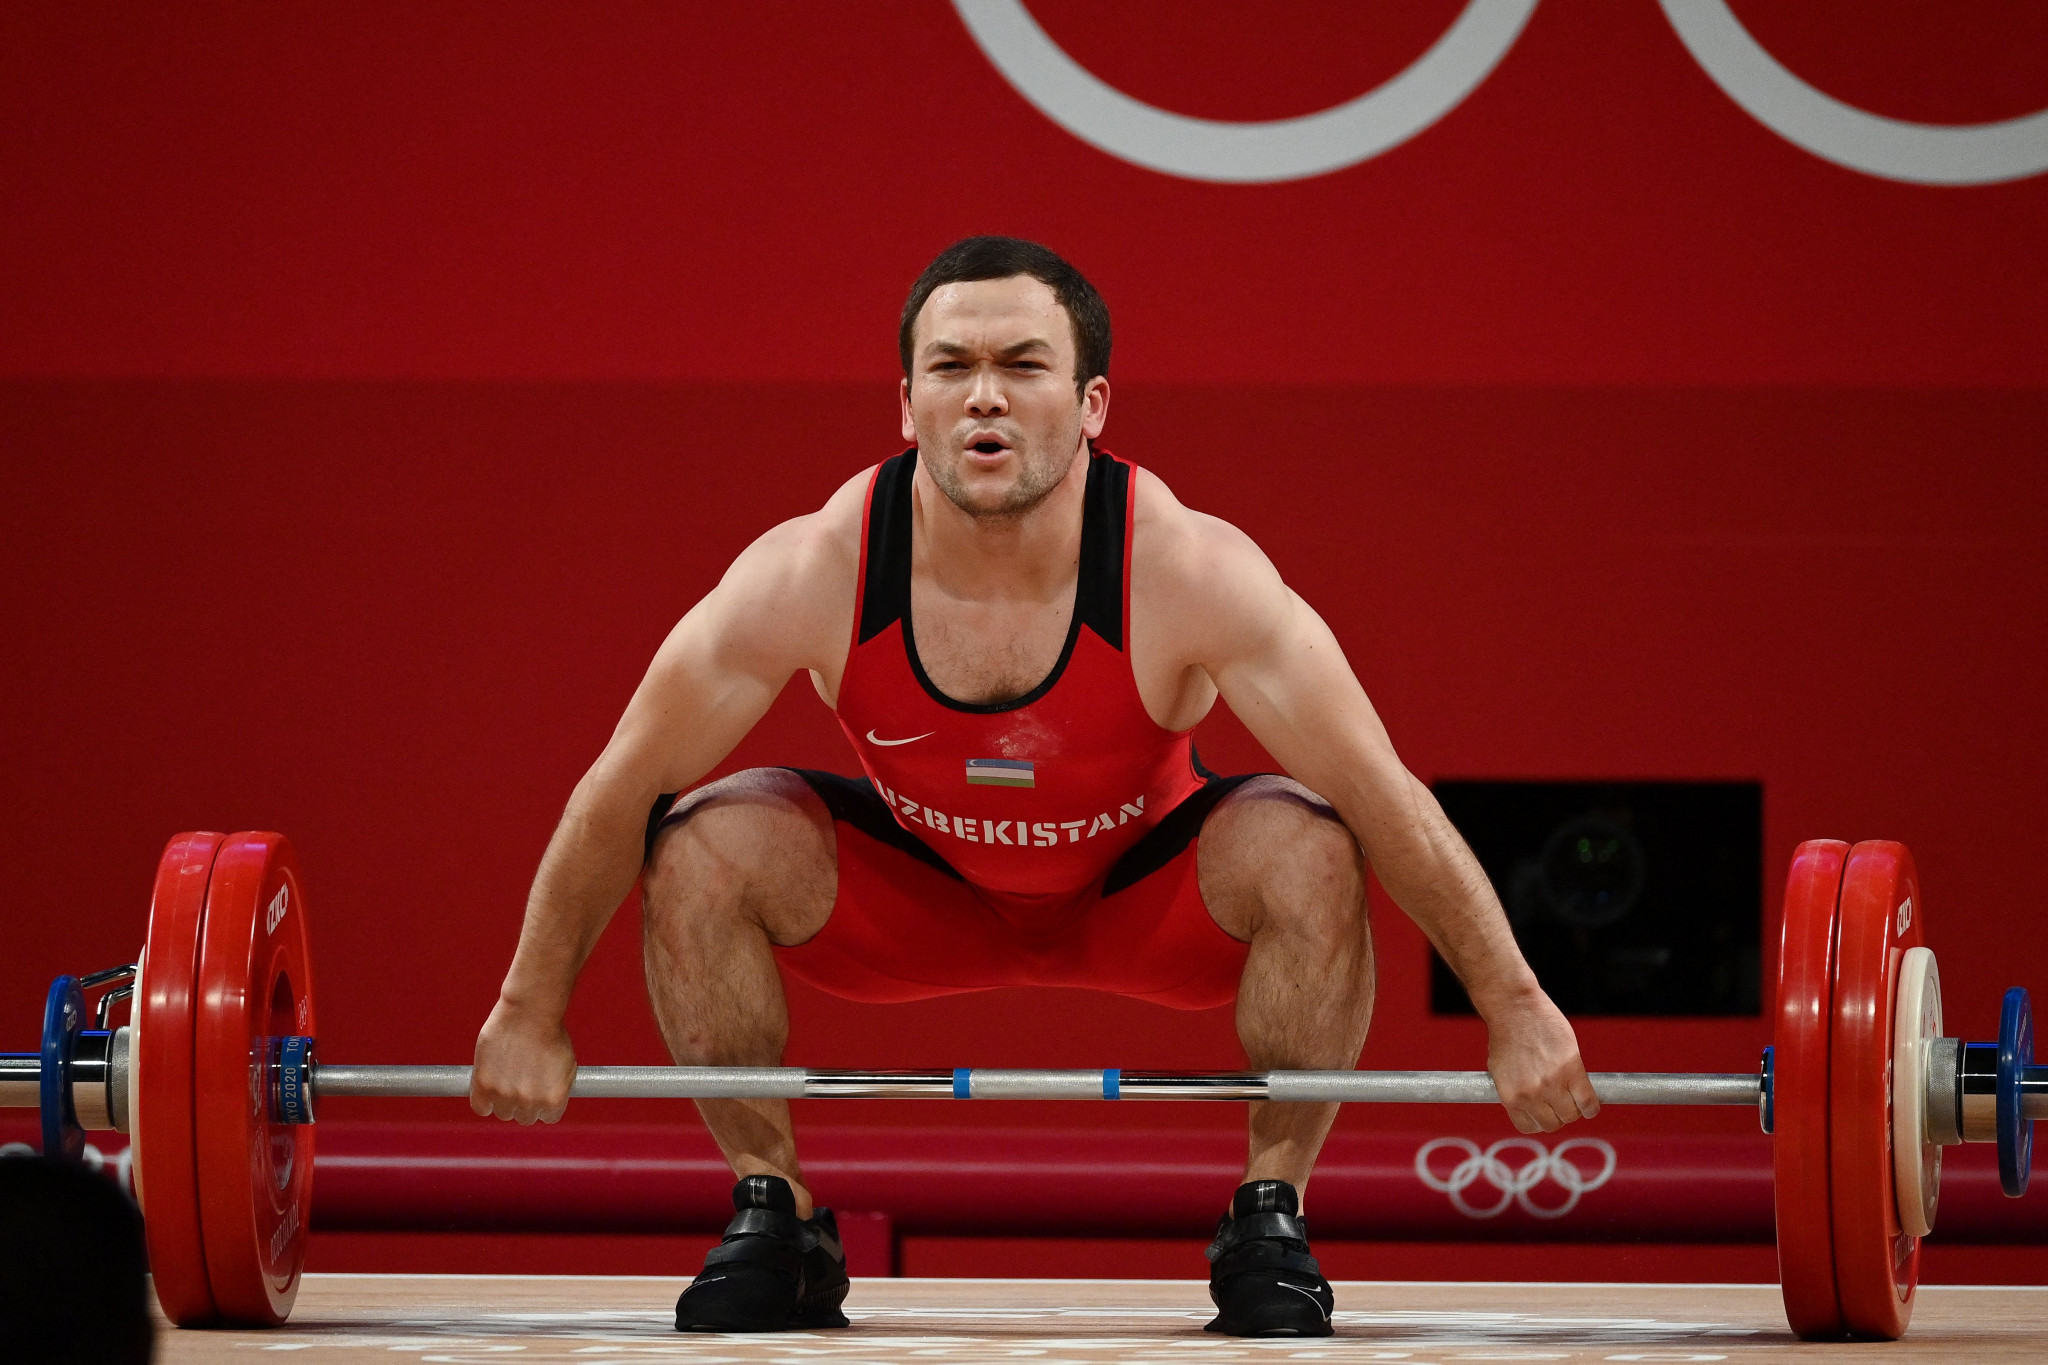 Uzbekistan's Adkhamjon Ergashev triumphed in the men's 67kg at the Asian Weightlifting Championships ©Getty Images